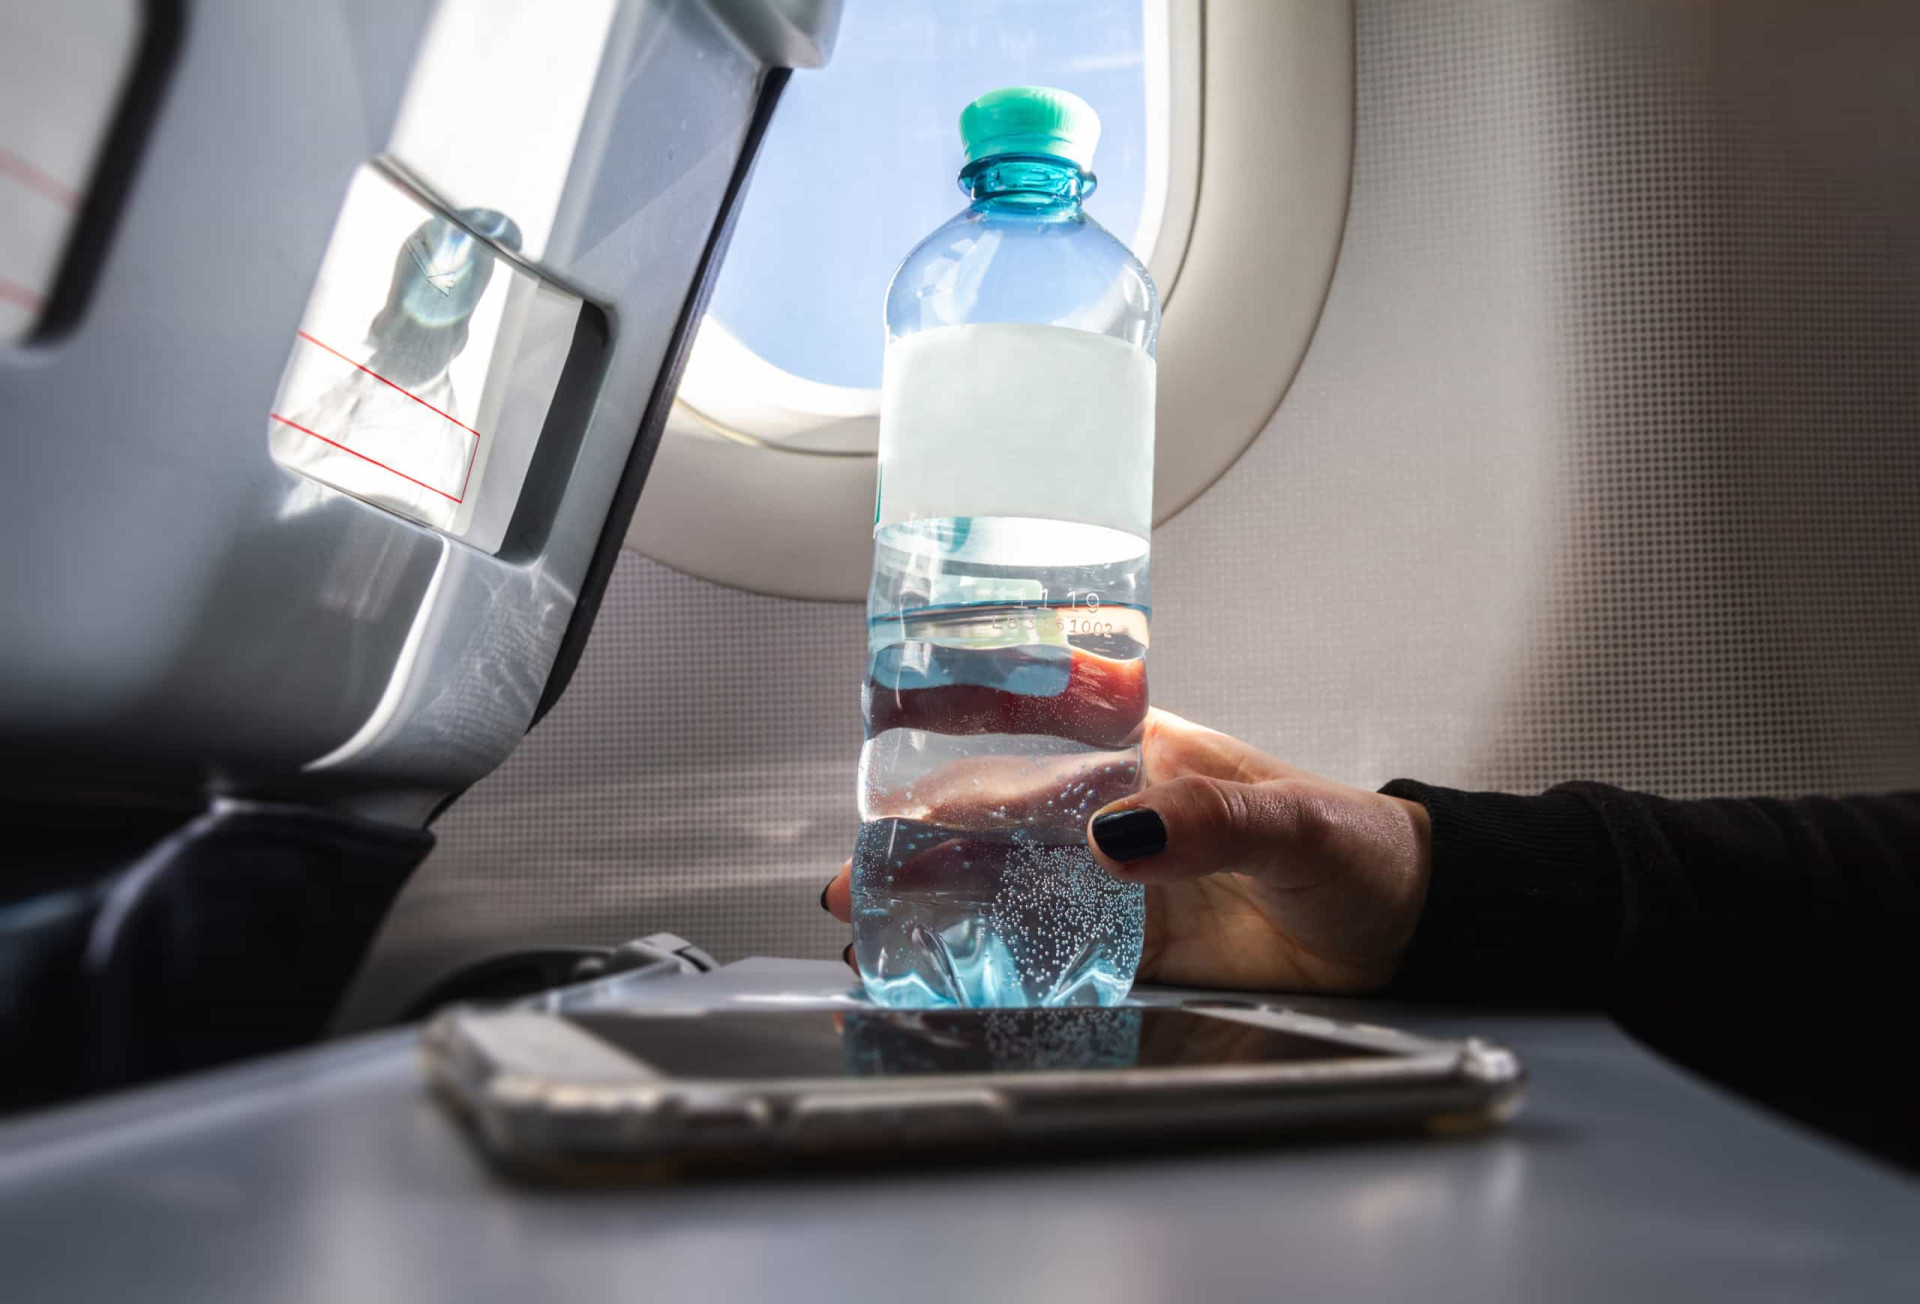 <p>However, be sensible when it comes to booze onboard, as it can mess up your sleep pattern. But one thing that's really important is to drink plenty of water. It will fight off dehydration and help combat jet lag.</p><p>You may also like:<a href="https://www.starsinsider.com/n/414200?utm_source=msn.com&utm_medium=display&utm_campaign=referral_description&utm_content=500296v1en-us"> Celebs accused of homophobia and transphobia </a></p>